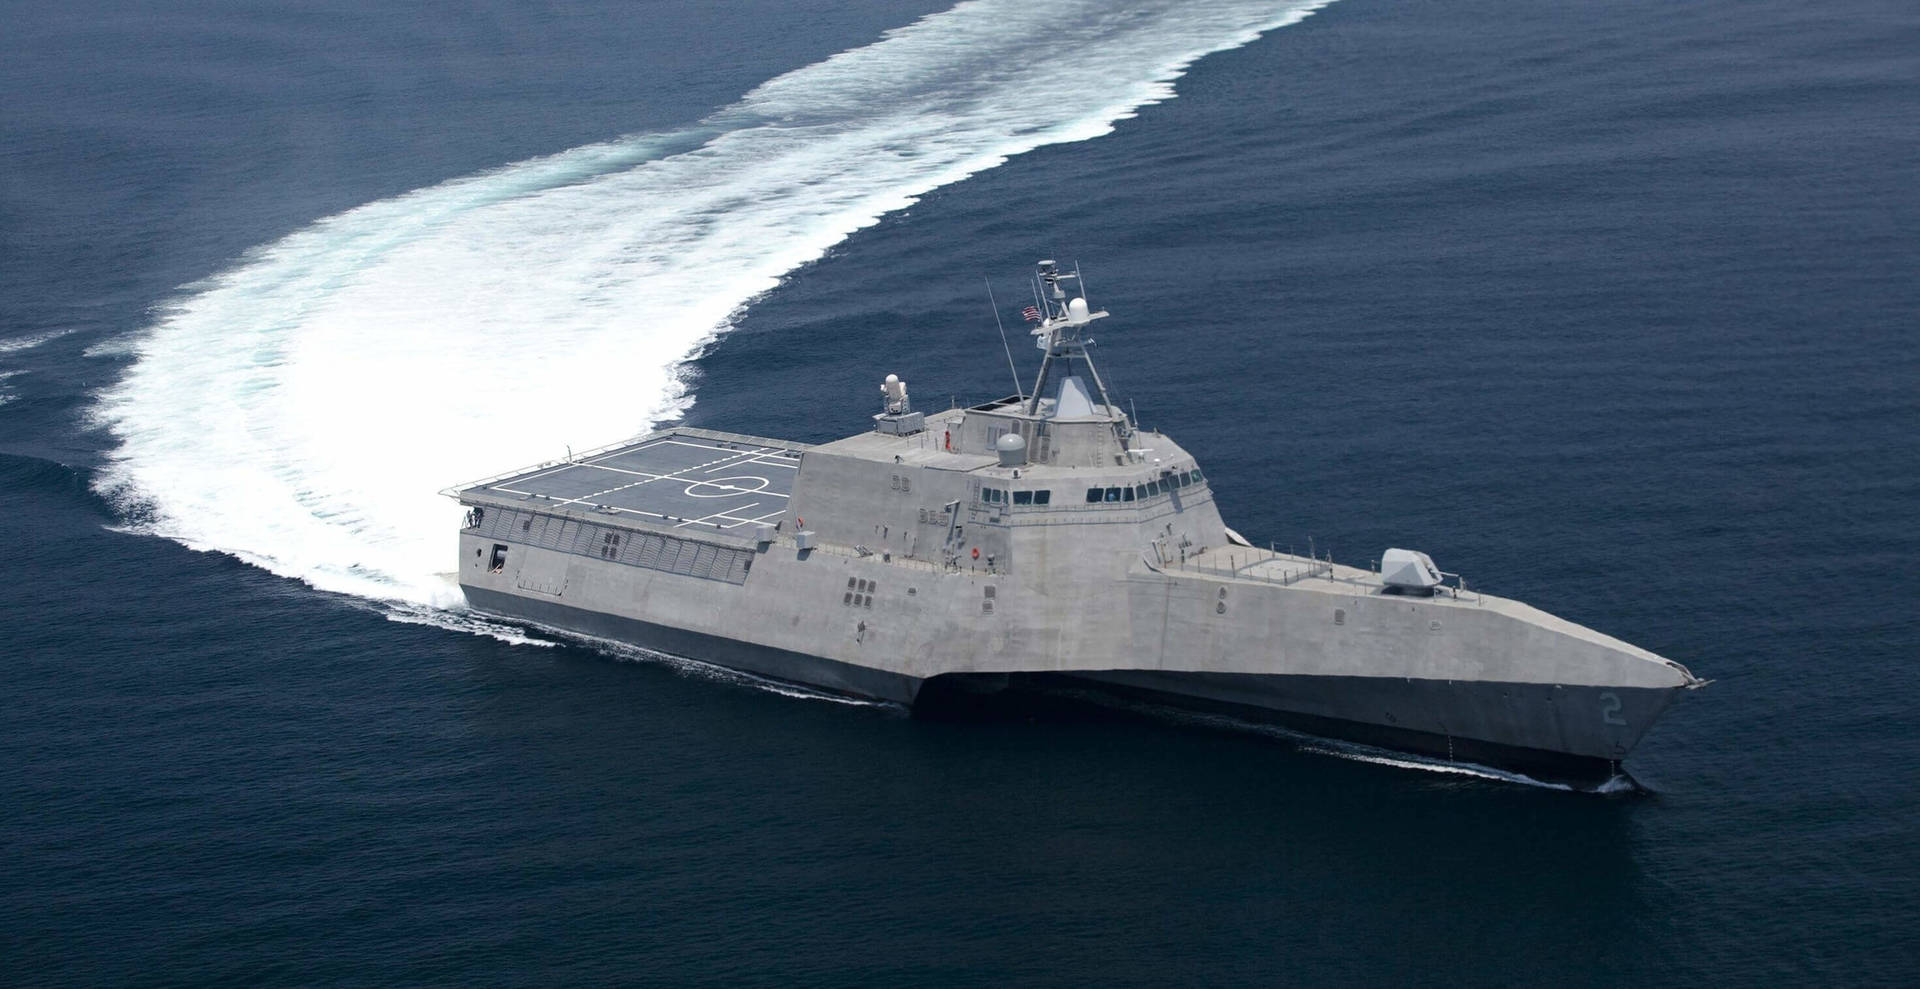 LCS-2 USS Independence Builder Trials 02 - July 2009